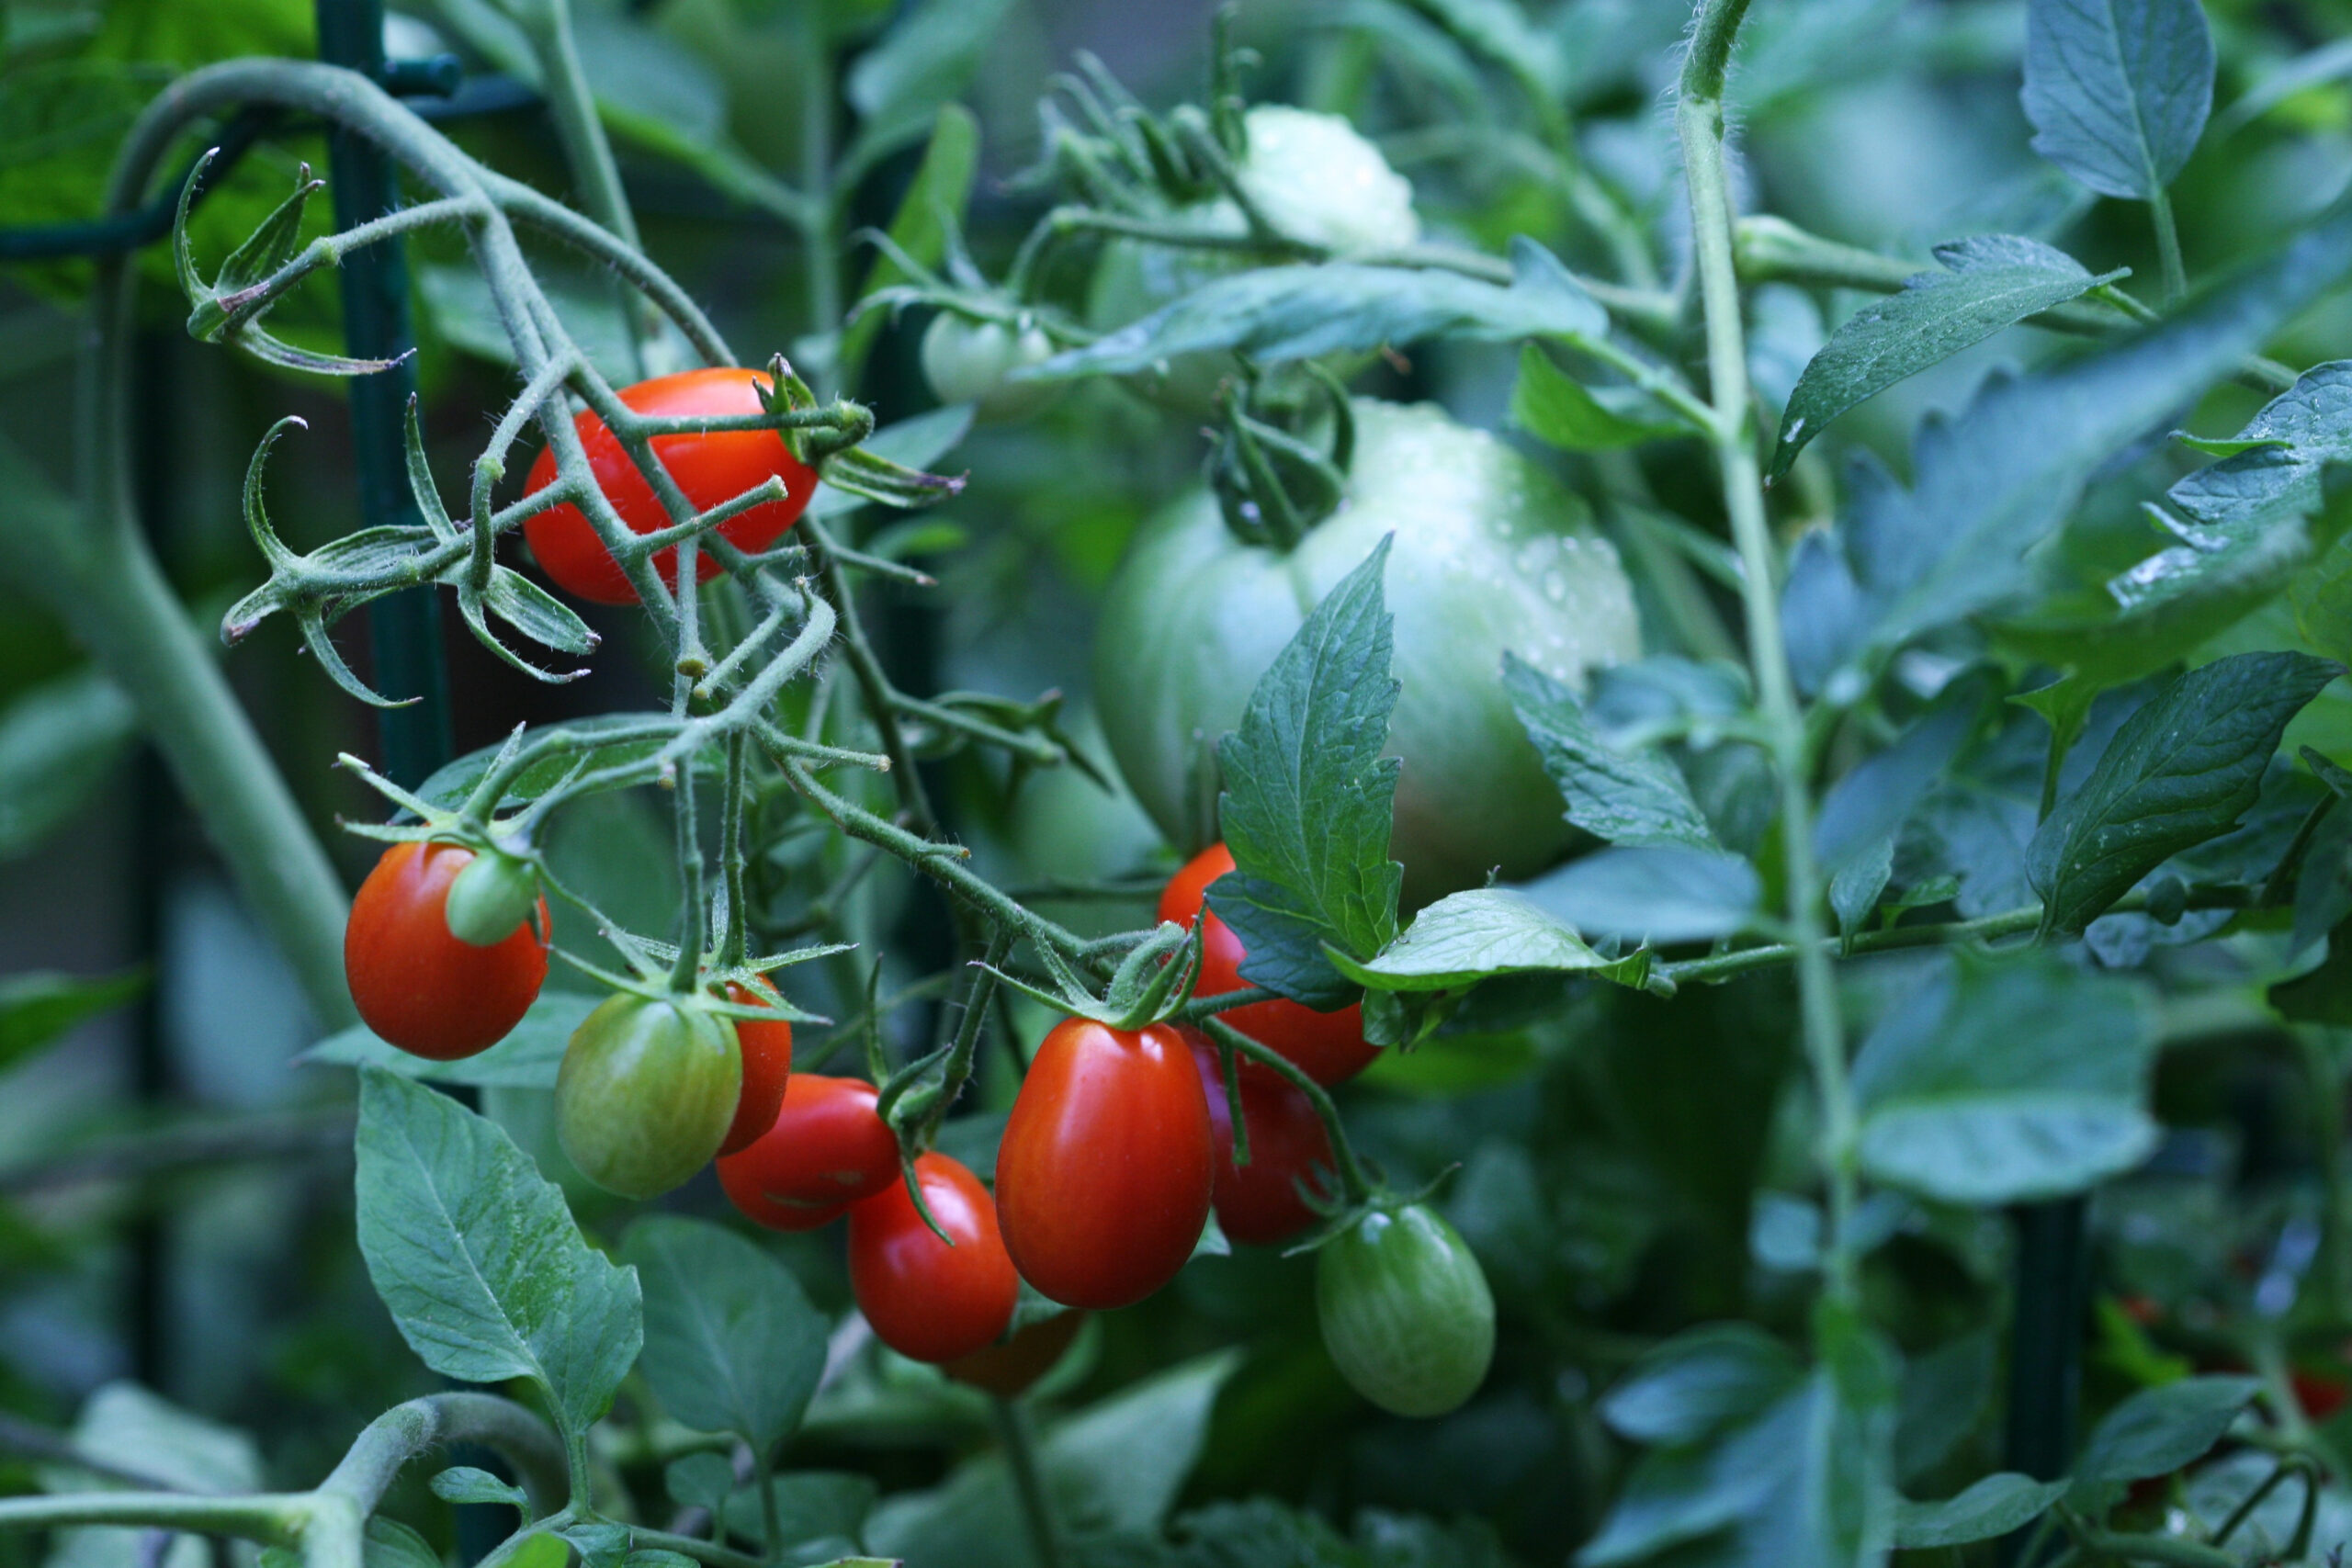 Drought, Heat Have Been Tough On Tomatoes